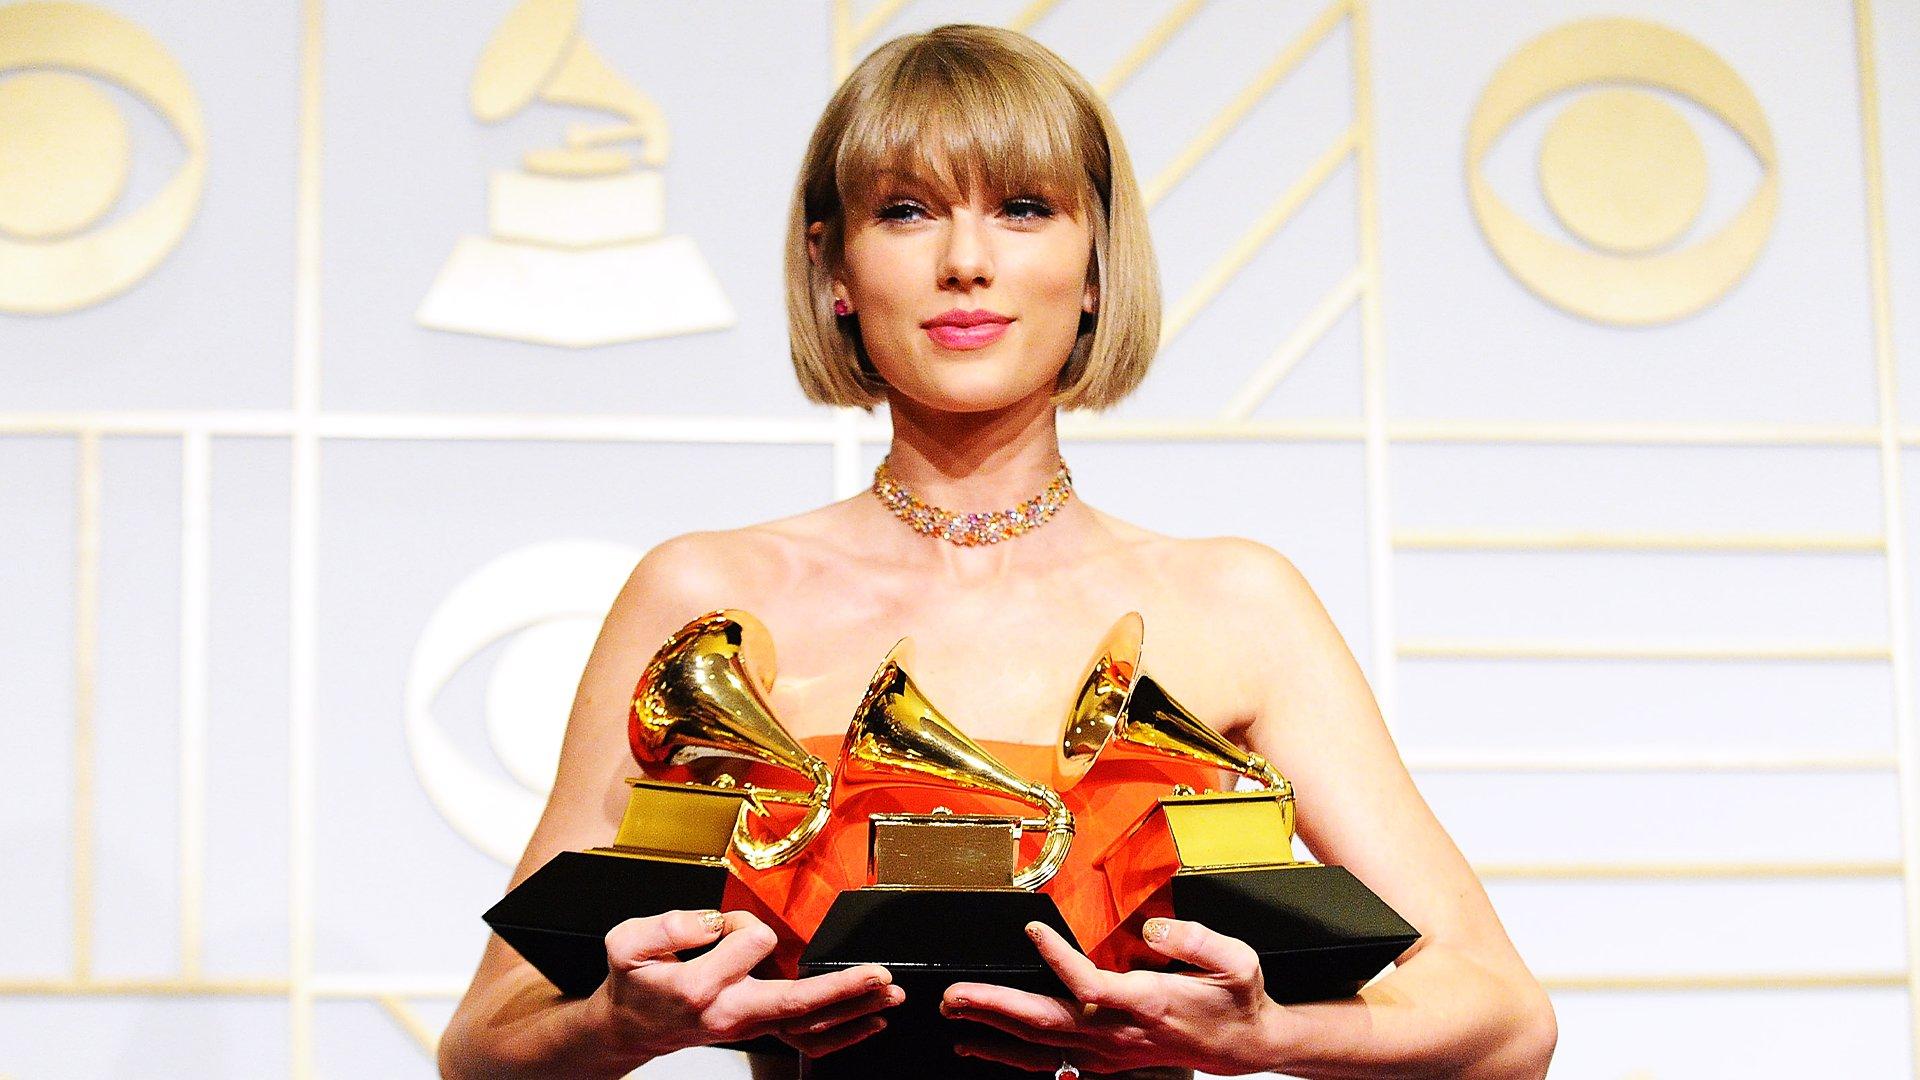 Taylor Swift Awards and Achievements